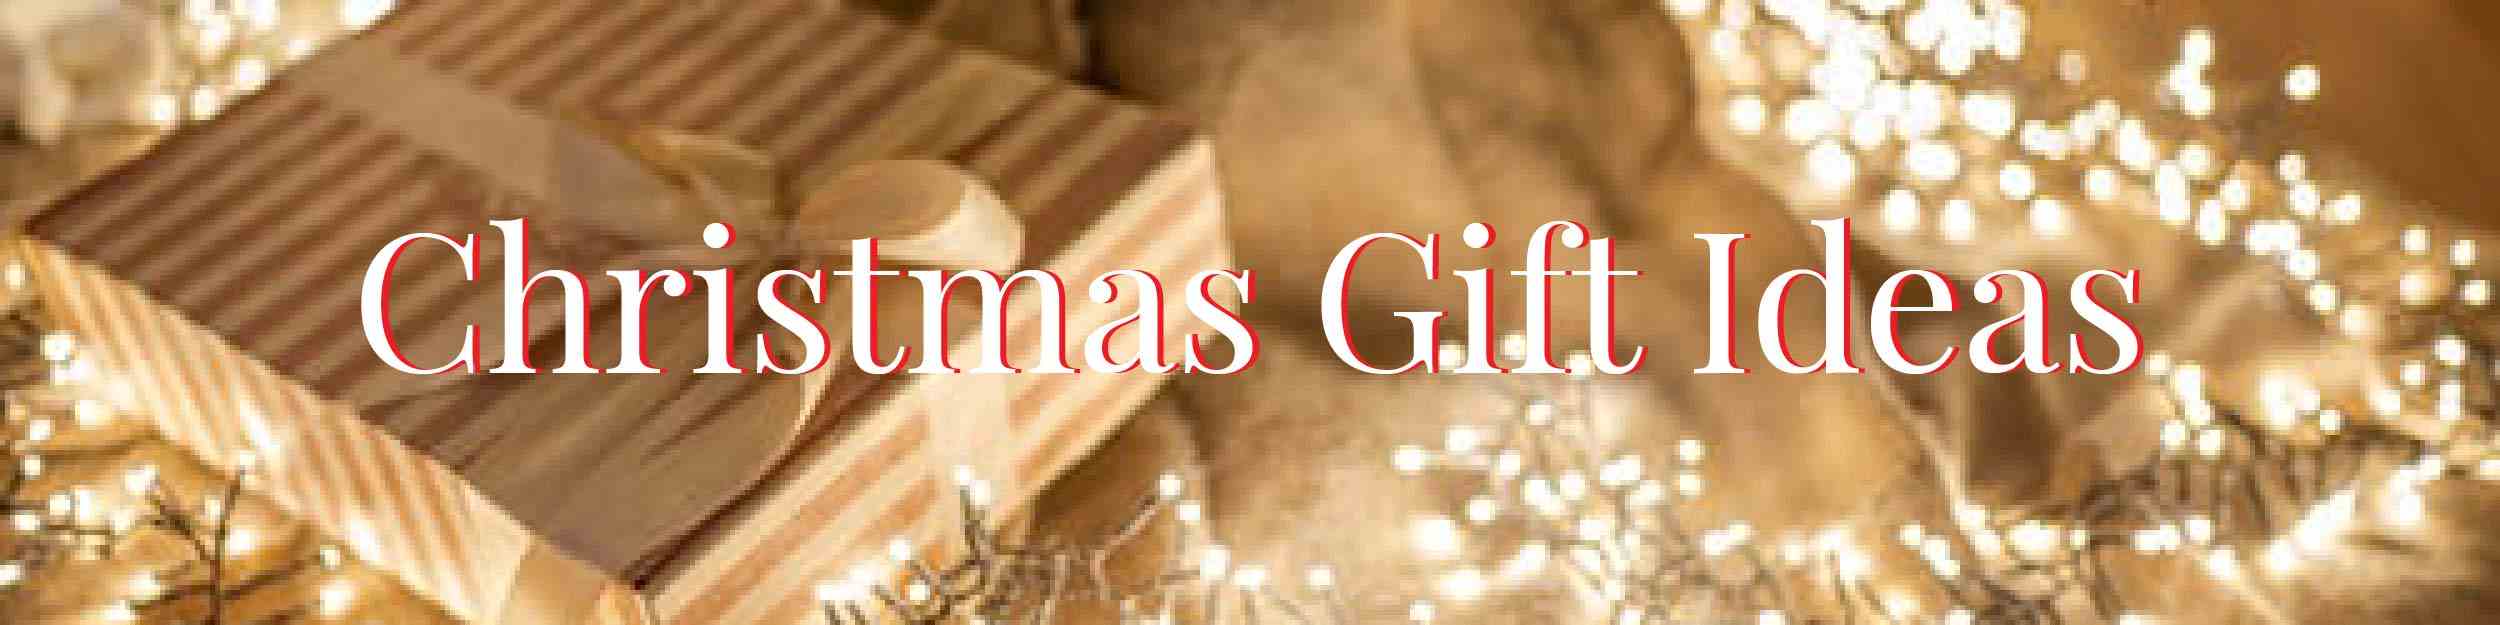 Christmas Gift Ideas For Friends & Friends